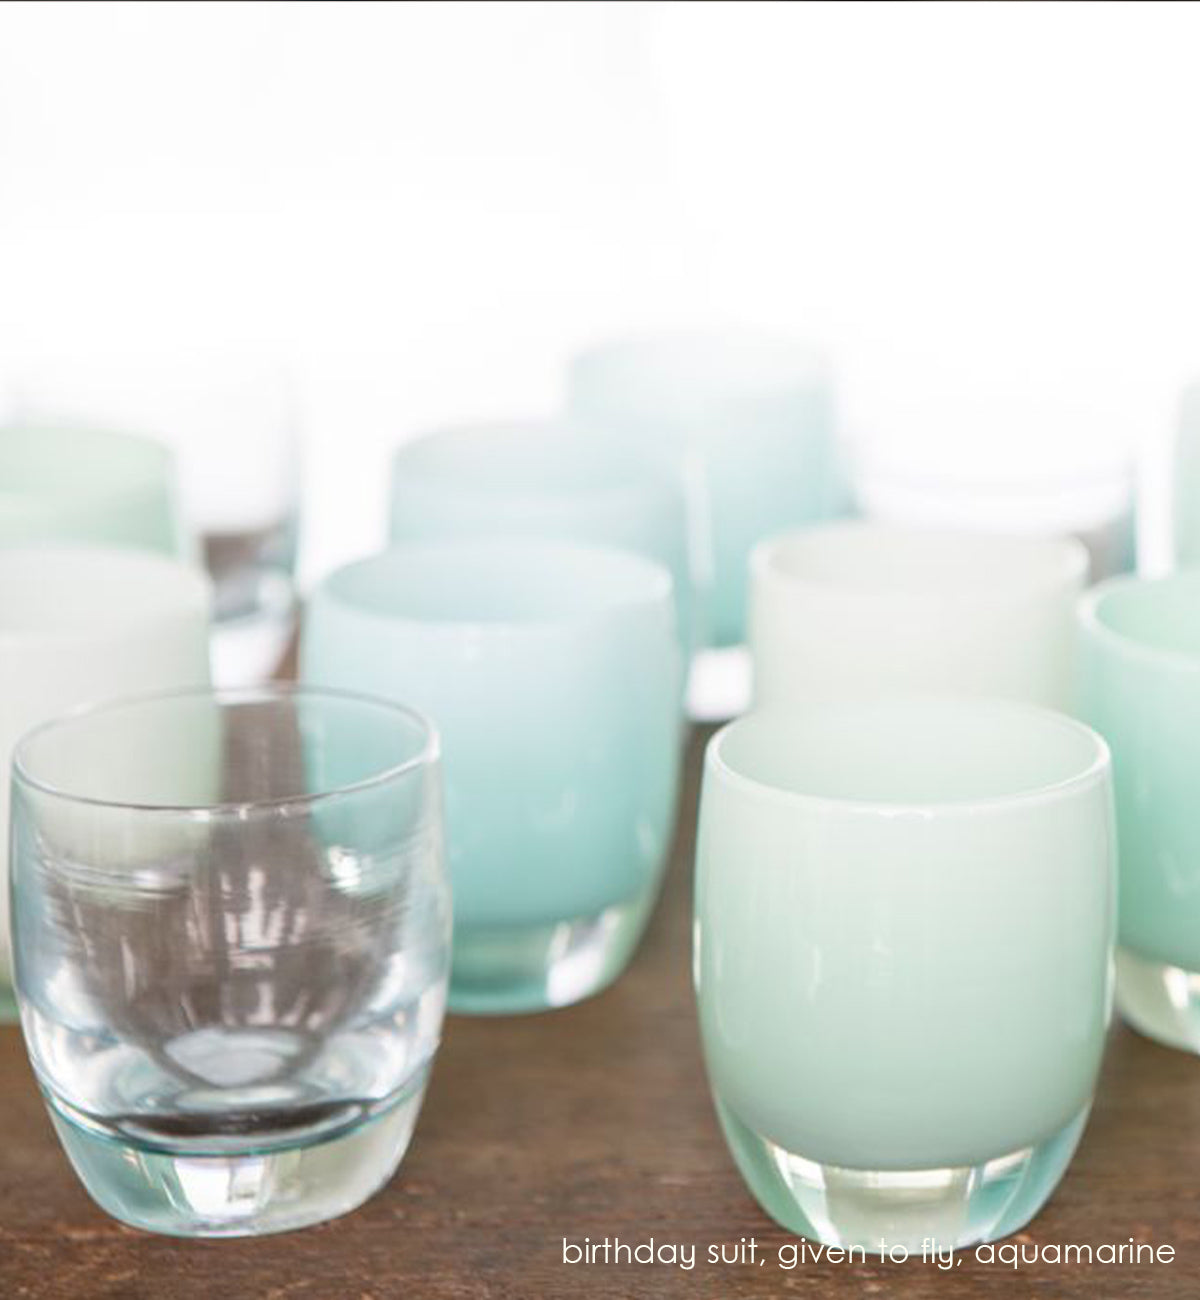 given to fly, sea salt, hand-blown glass votive candle holder on a wood table with birthday suit and aquamarine.